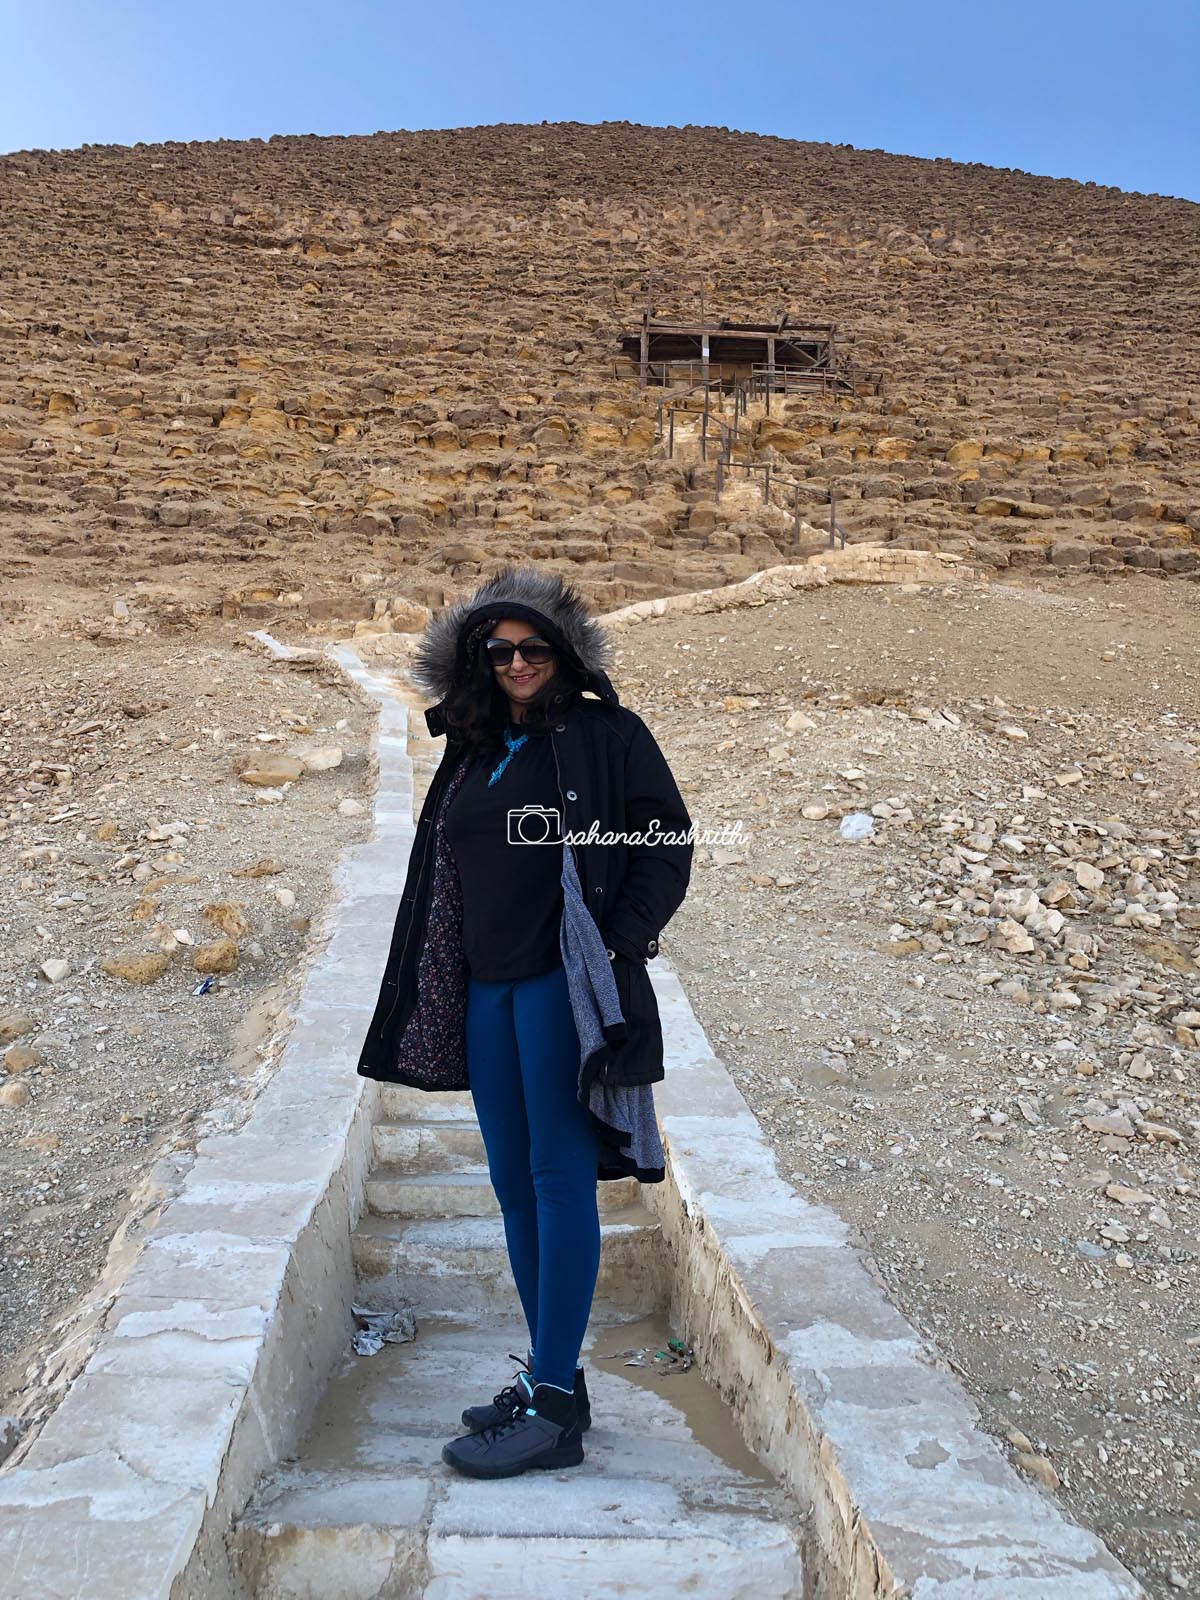 Indian woman traveller standing in front of Red Pyramid entrance